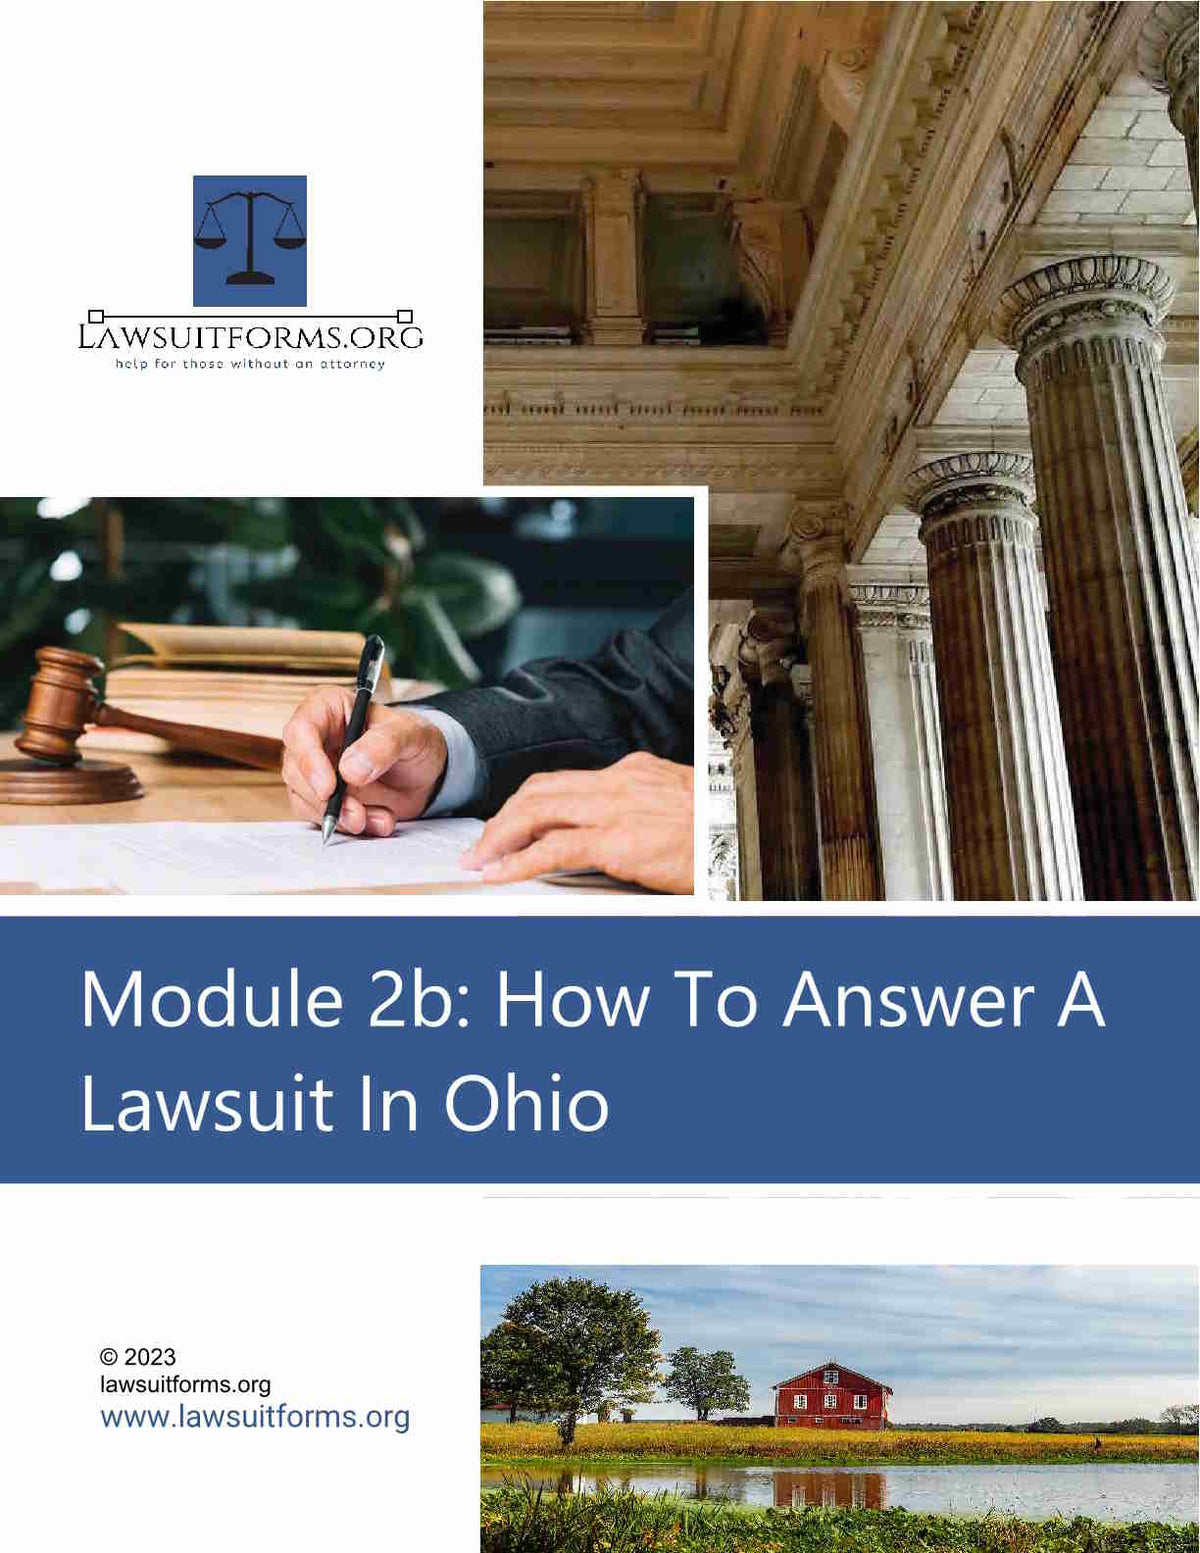 How to answer a lawsuit in Ohio